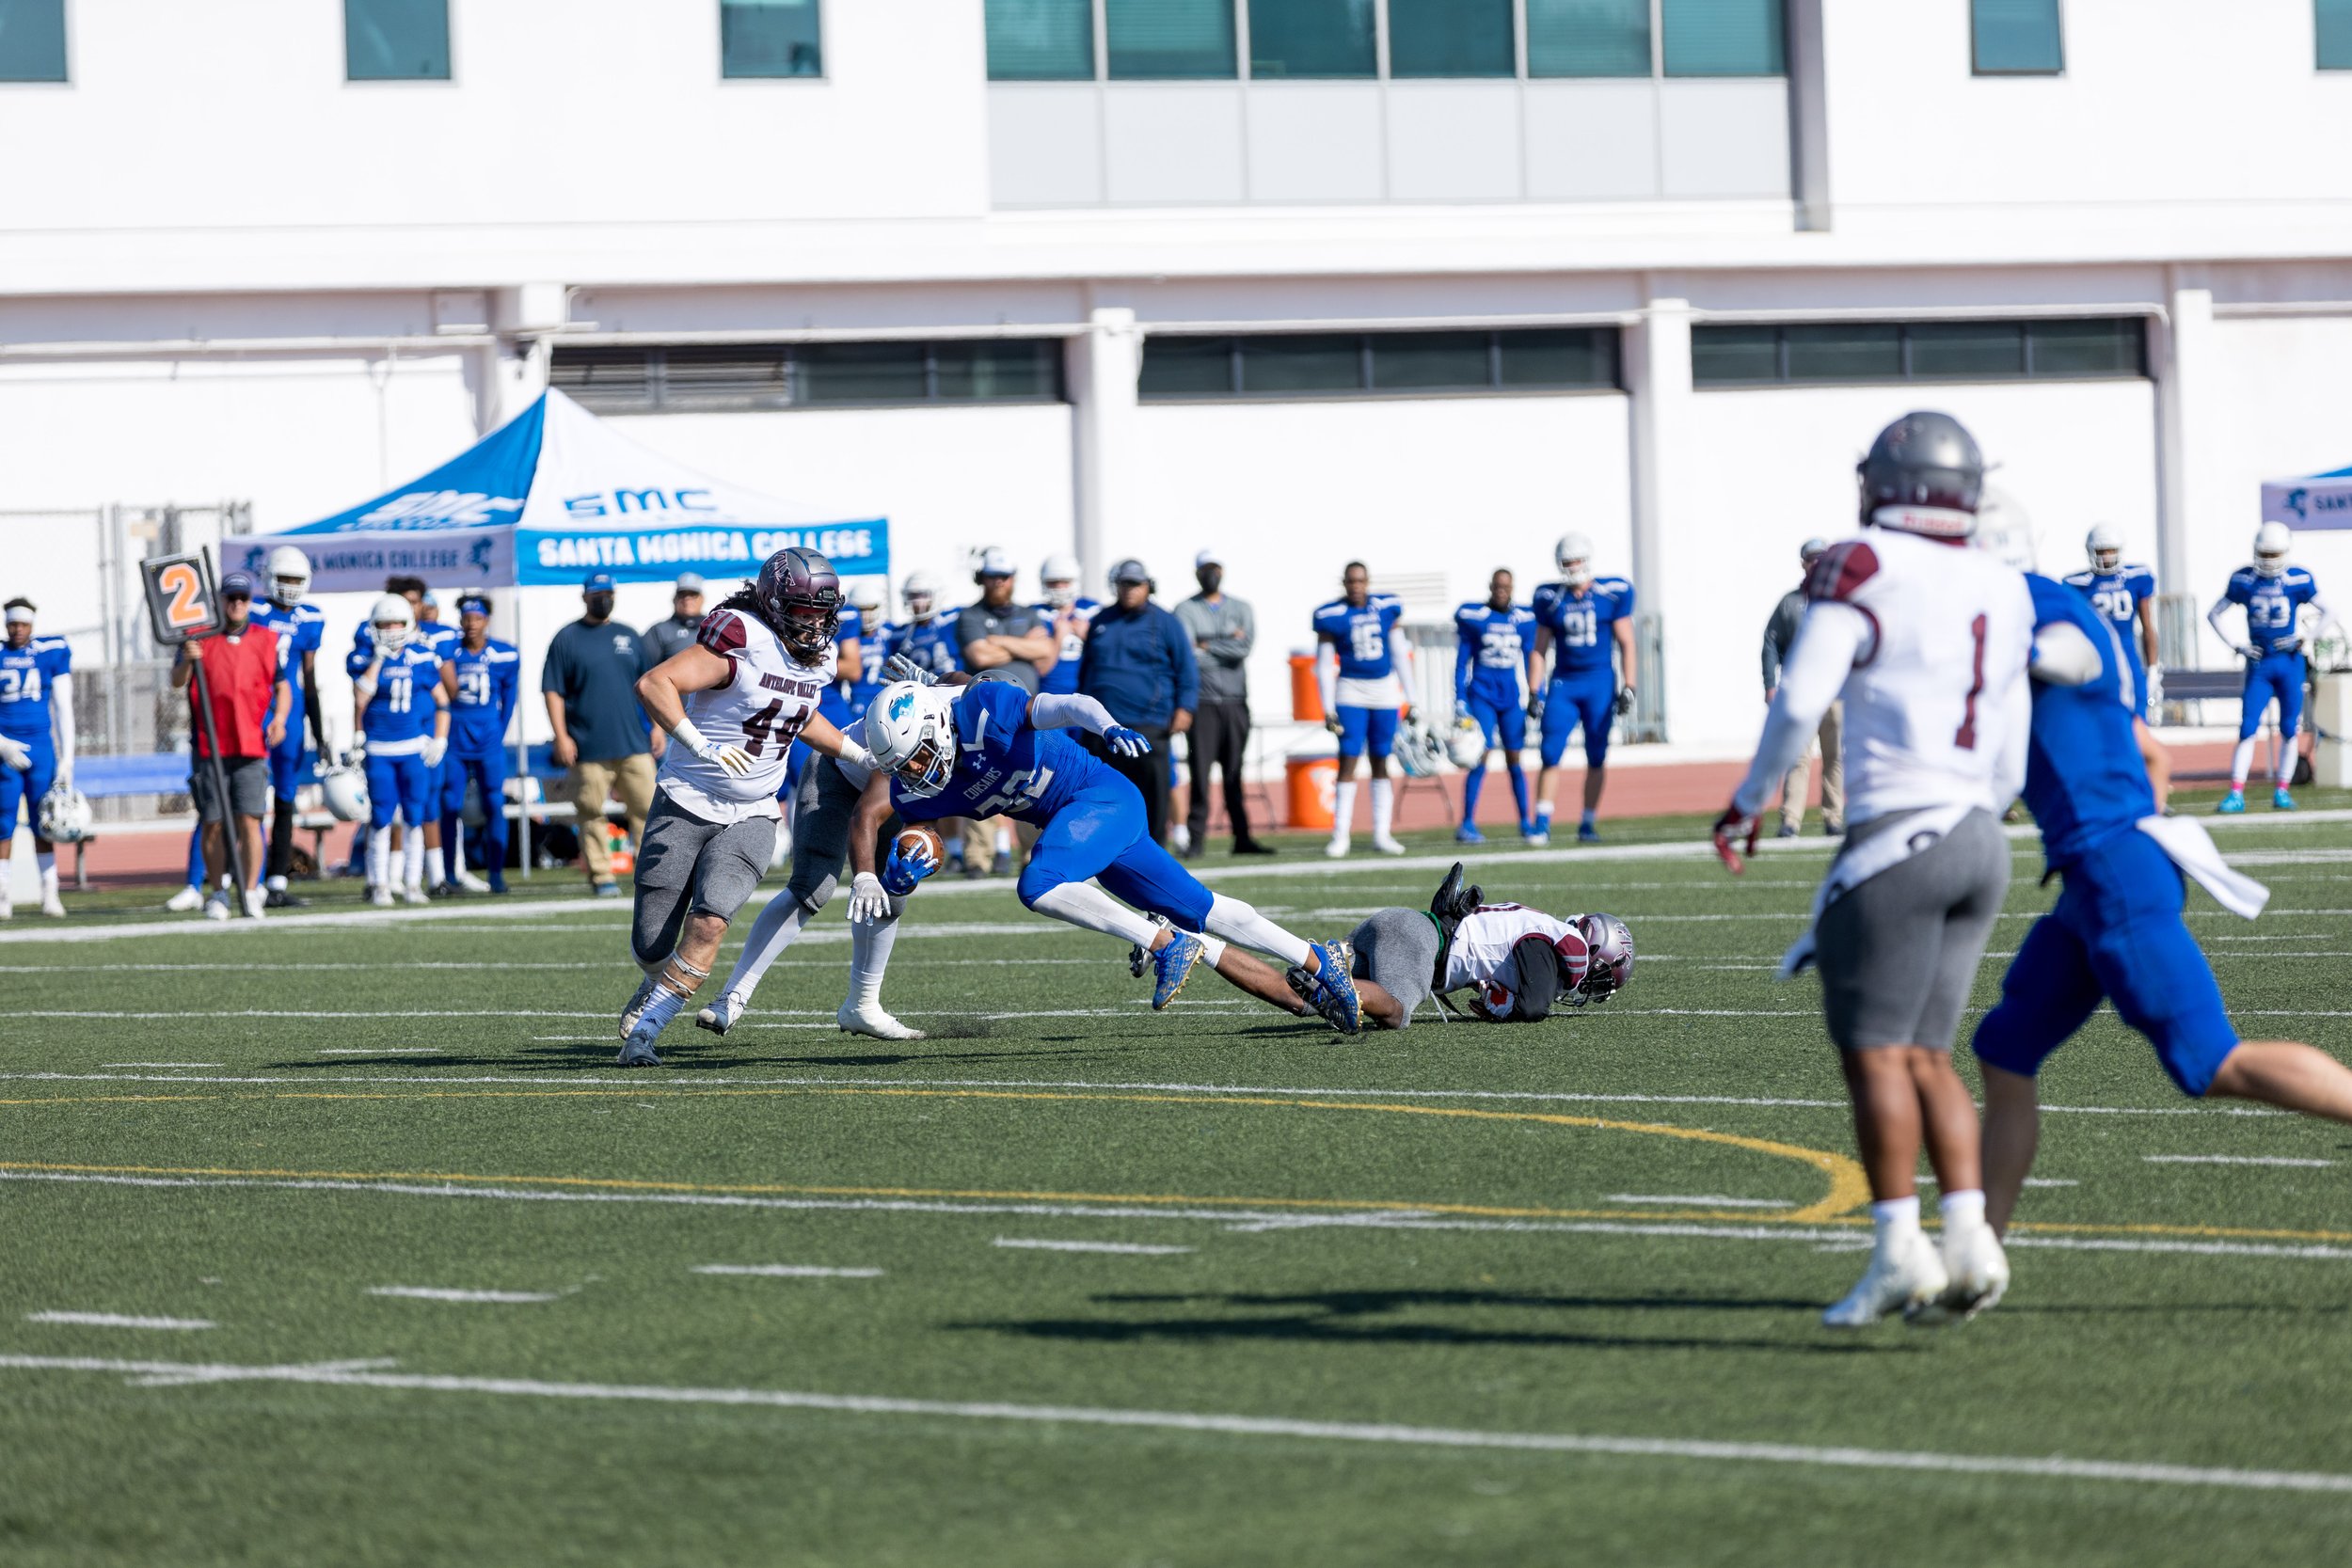  SMC RB (32) slips a tackle.  Santa Monica College lost to Antelope Valley 36-31 in Santa Monica, California on October 23, 2021.(Maxim Elramsisy | The Corsair) 